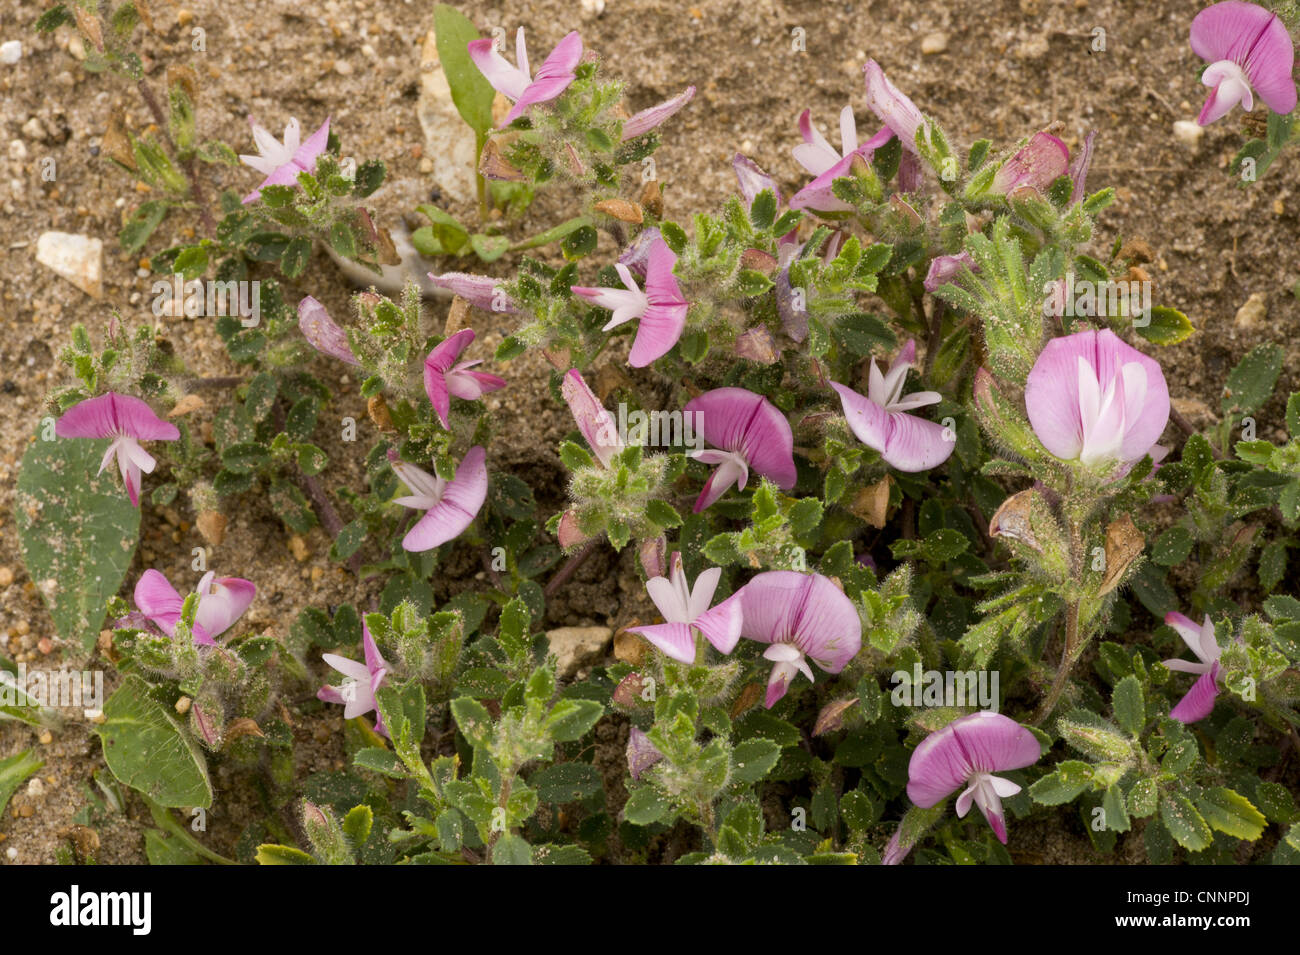 Common Restharrow (Ononis repens) flowering, Breckland, Norfolk, England, july Stock Photo